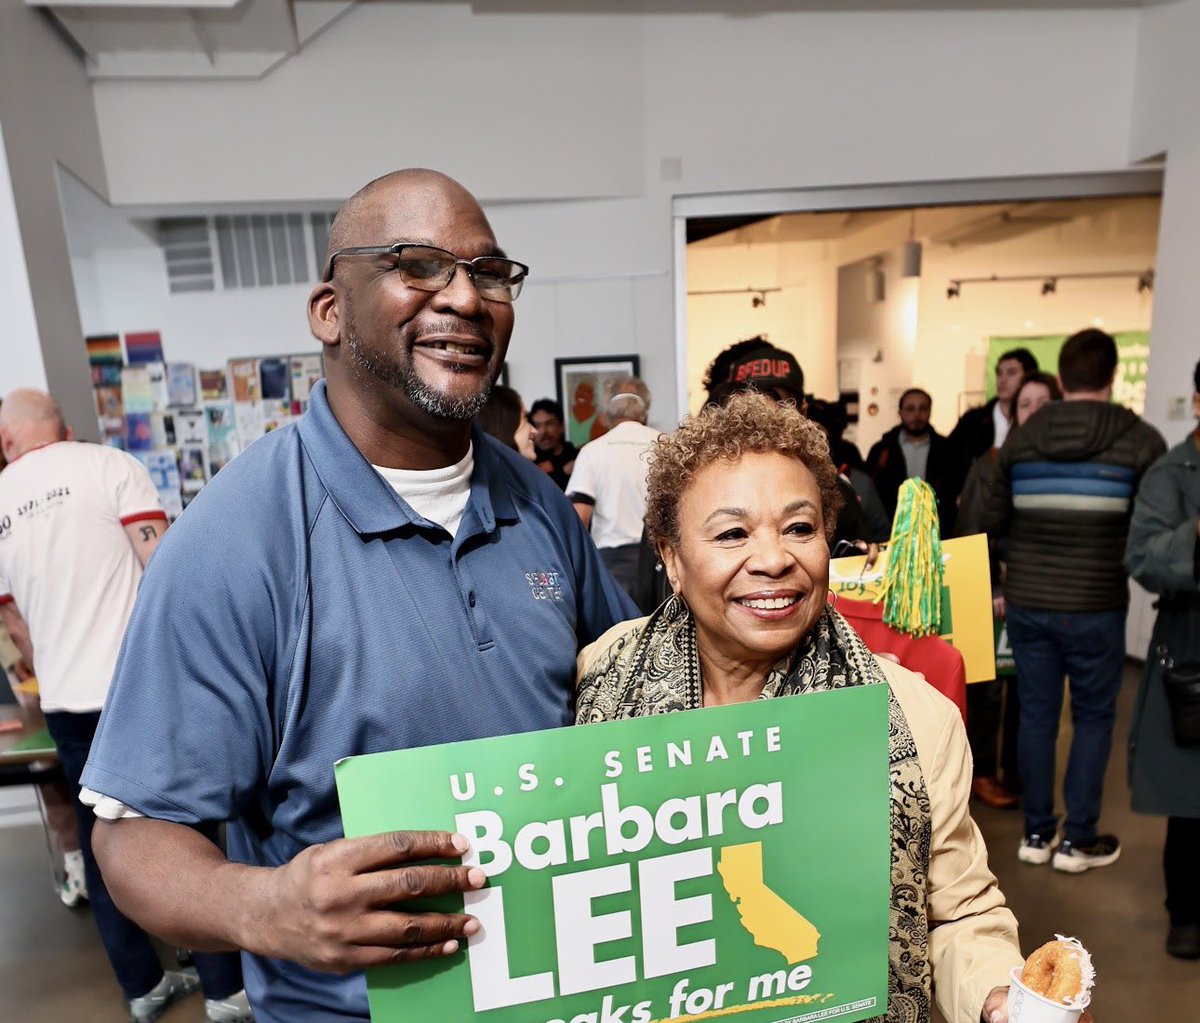 Team Lee shows up and shows out—rain or shine! Just over two weeks left to vote—let’s do this!